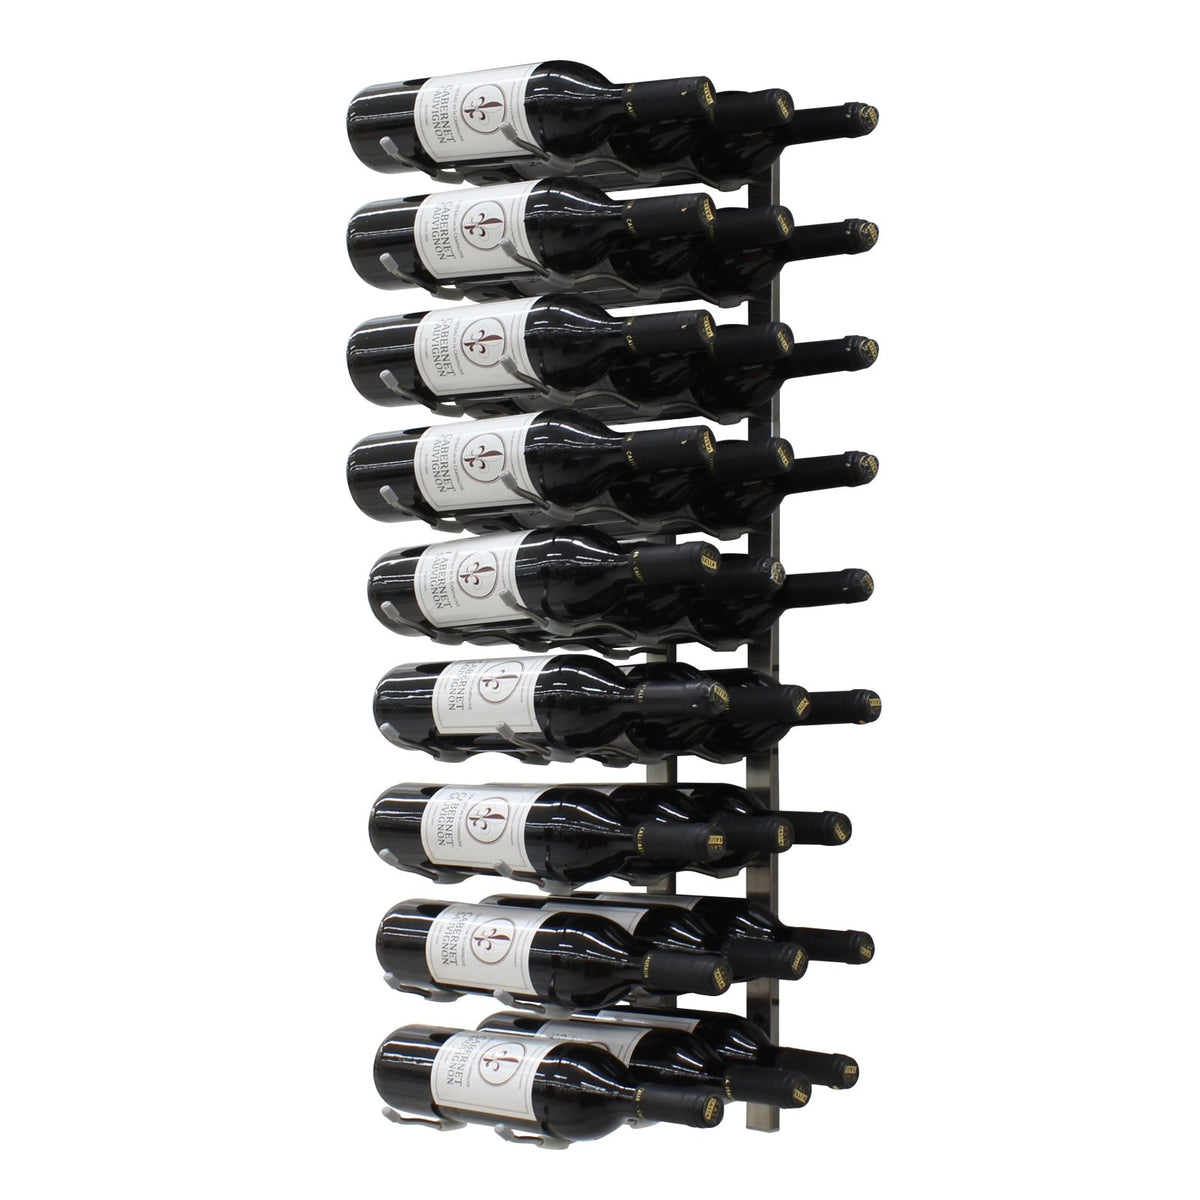 Vinotemp EP - WIRE3 Epicureanist Metal Wine Rack, 27 Bottle Capacity, in Stainless Steel (EP - WIRE3S) - TheChefStore.Com